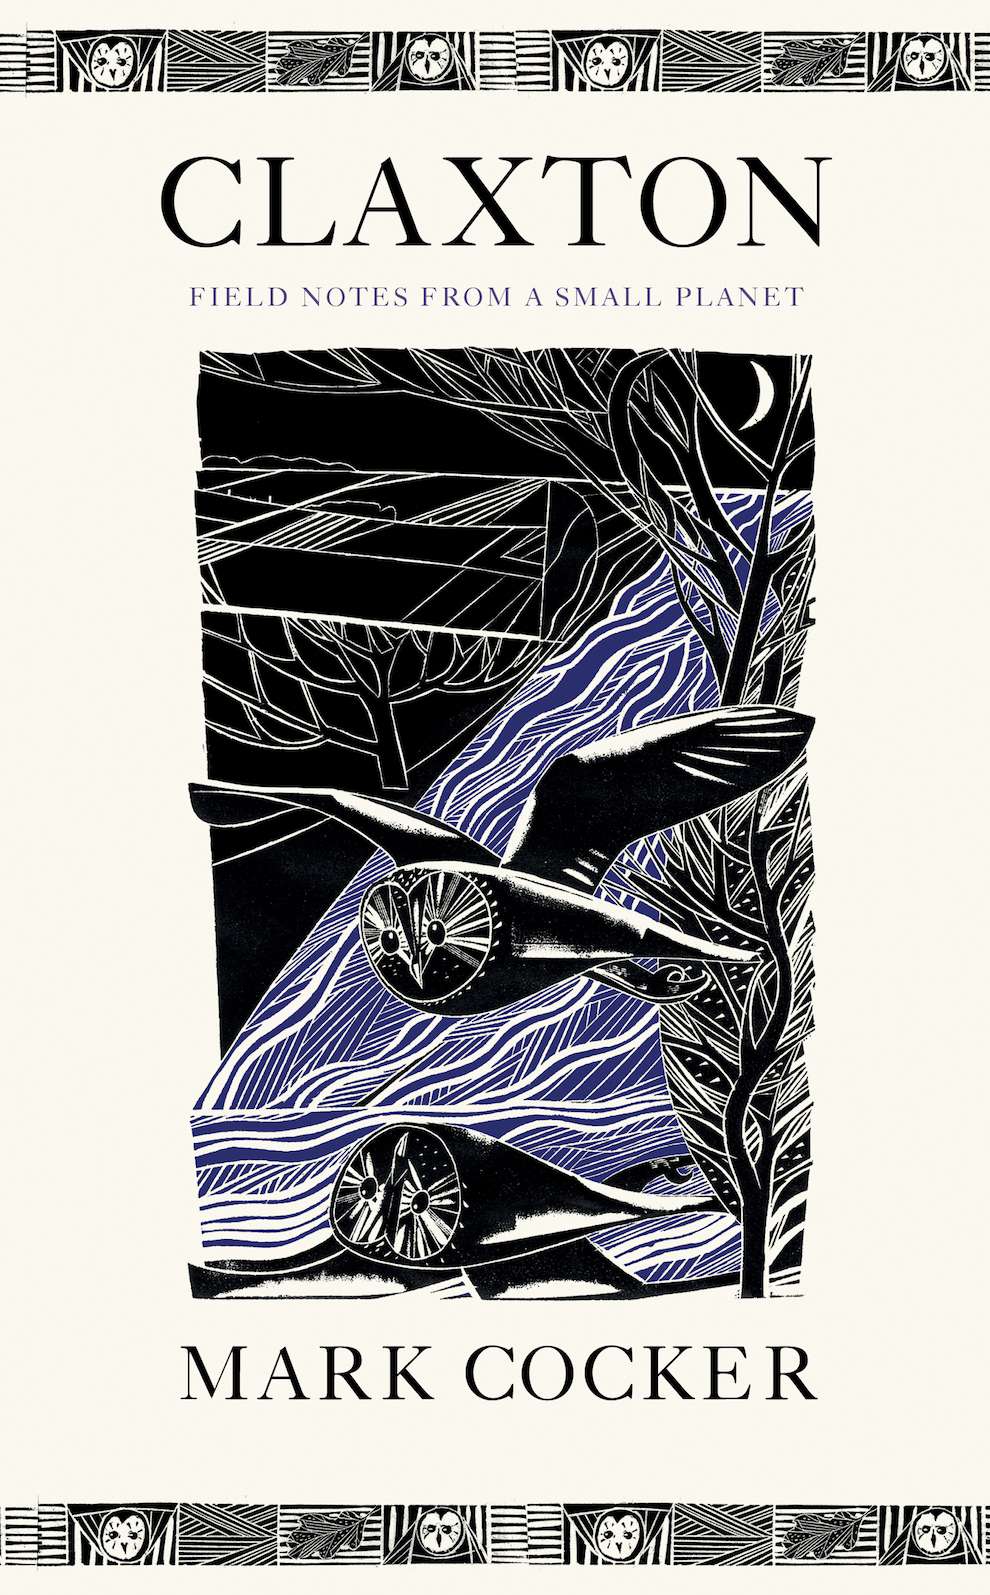 Jonathan Gibbs, Wood engraving book cover of owls 